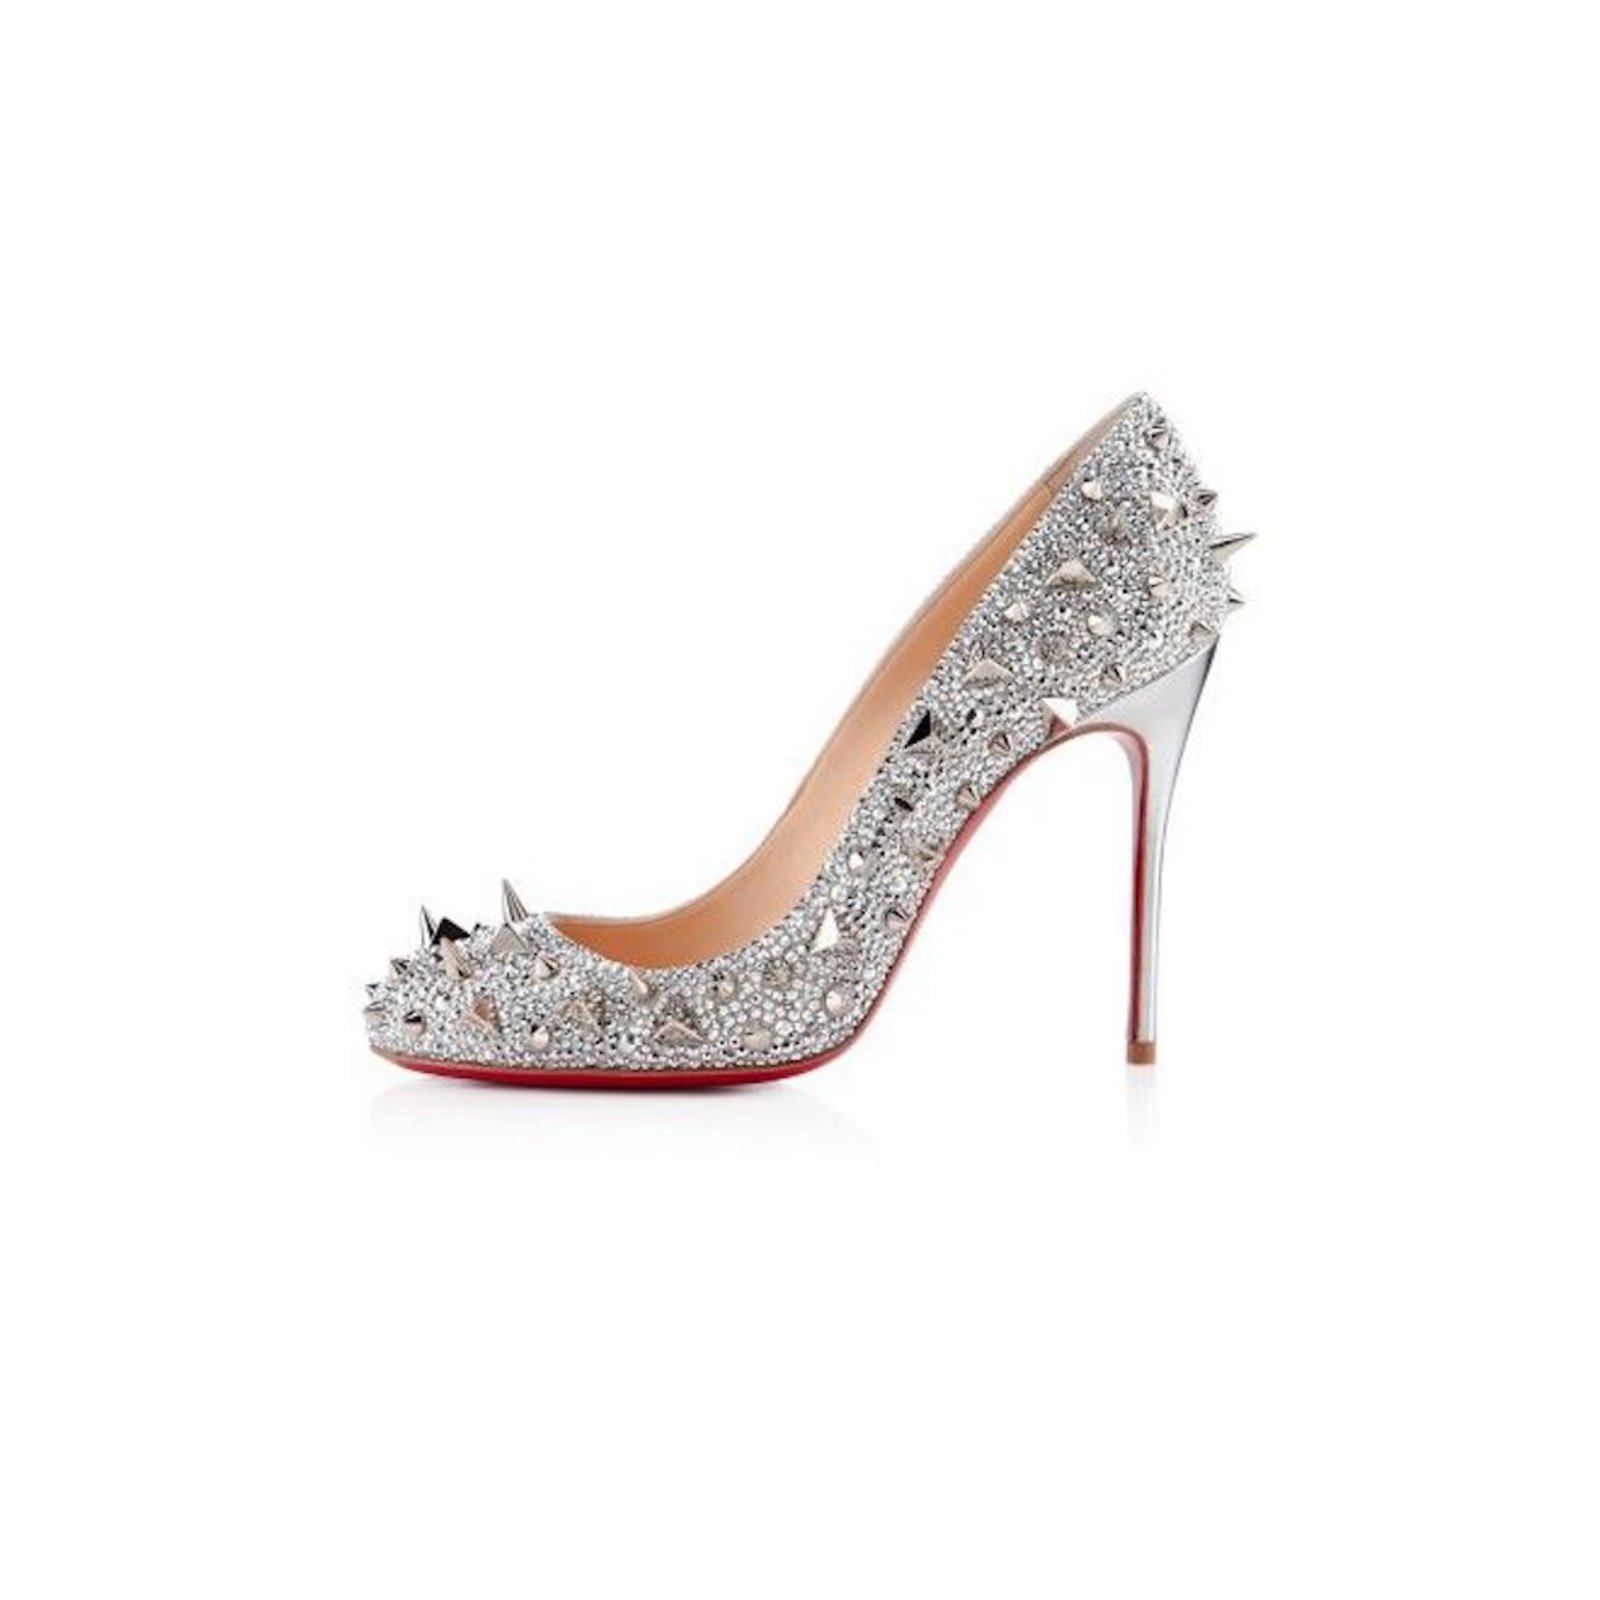 christian louboutin pumps with spikes